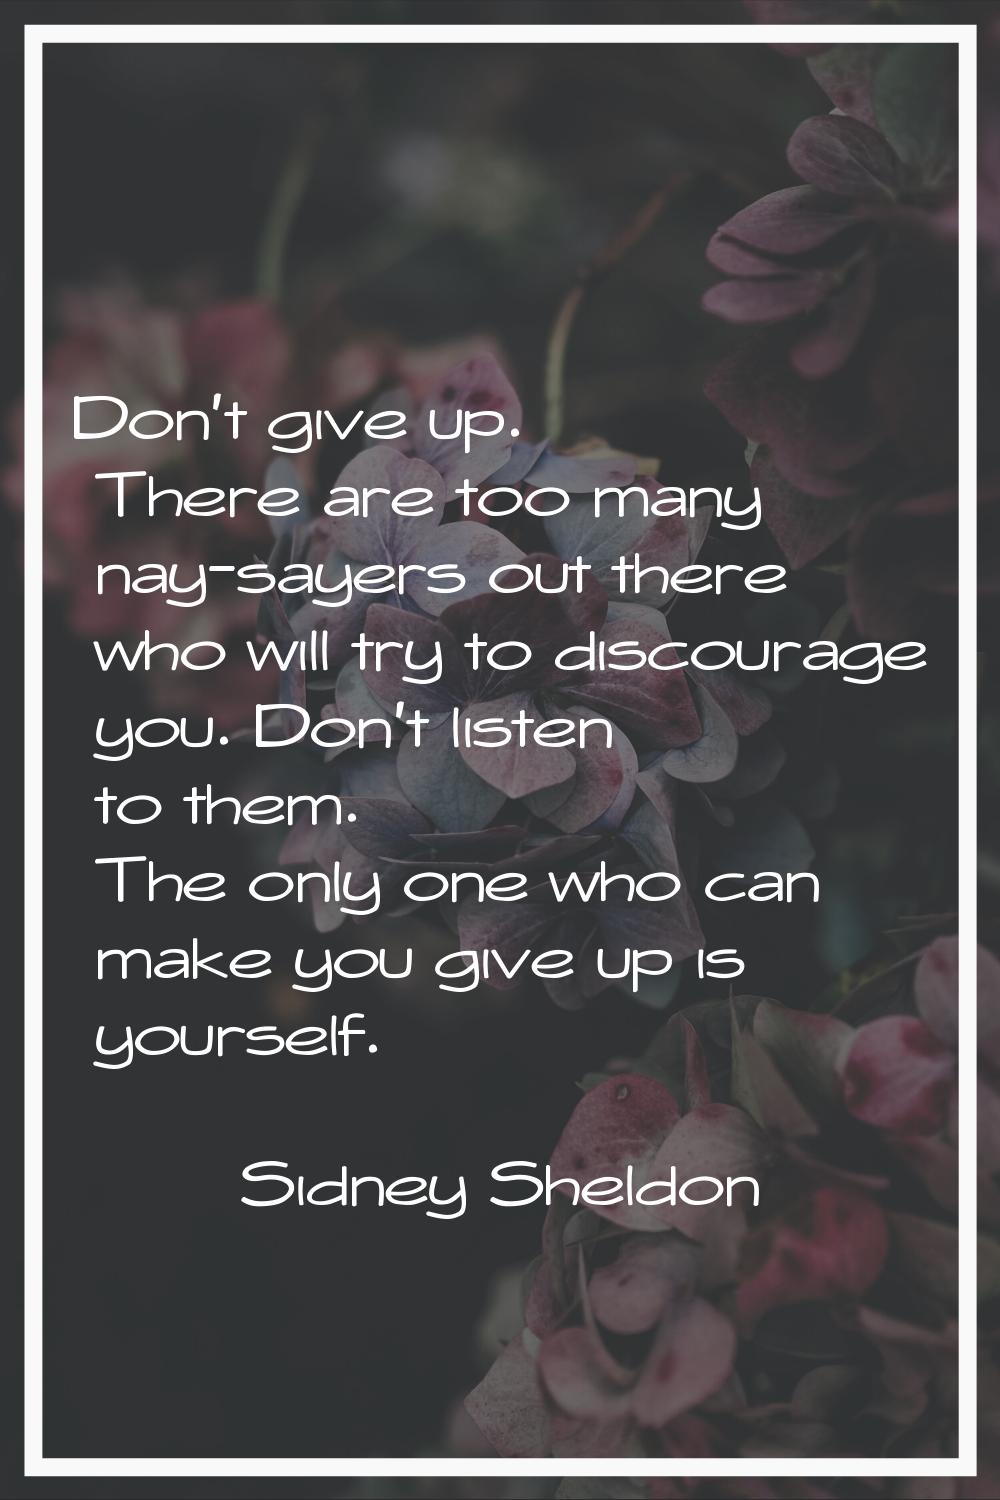 Don't give up. There are too many nay-sayers out there who will try to discourage you. Don't listen